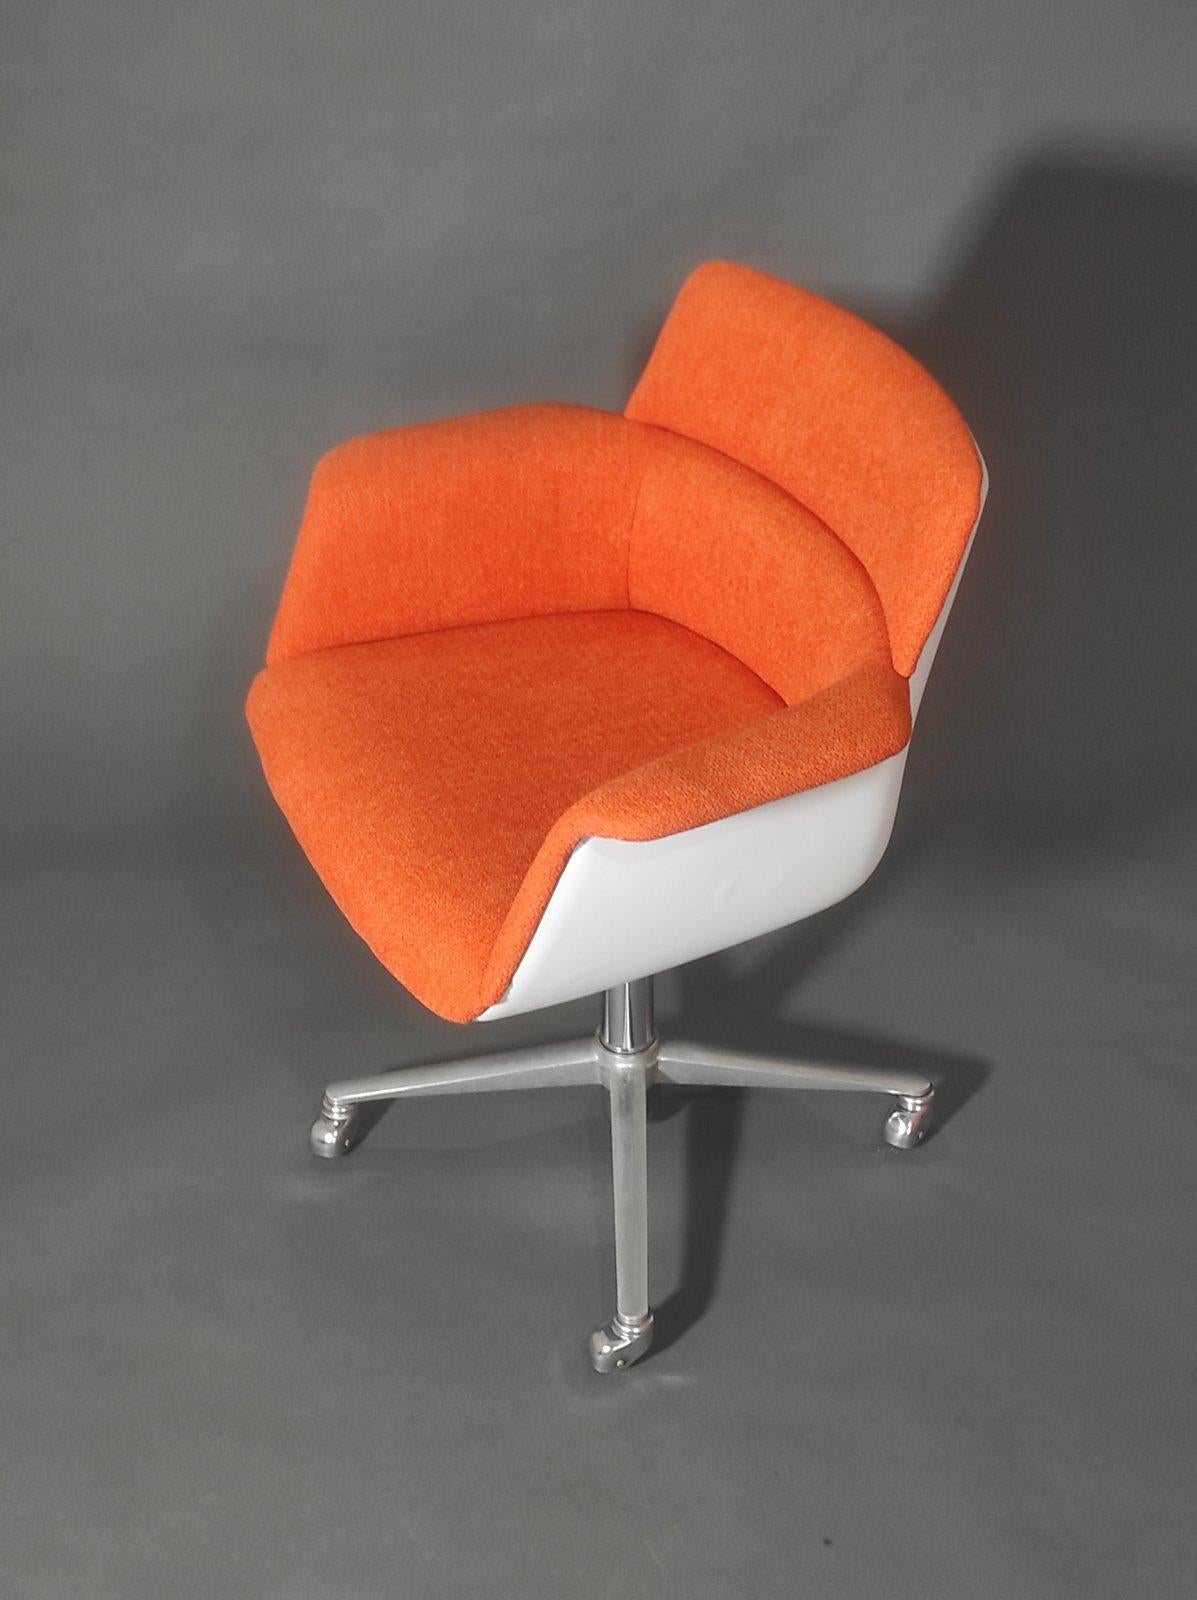 Aluminum Model 250 Space Age Ofice Chair By Georg Leowald for Vilkhahn 1960s For Sale